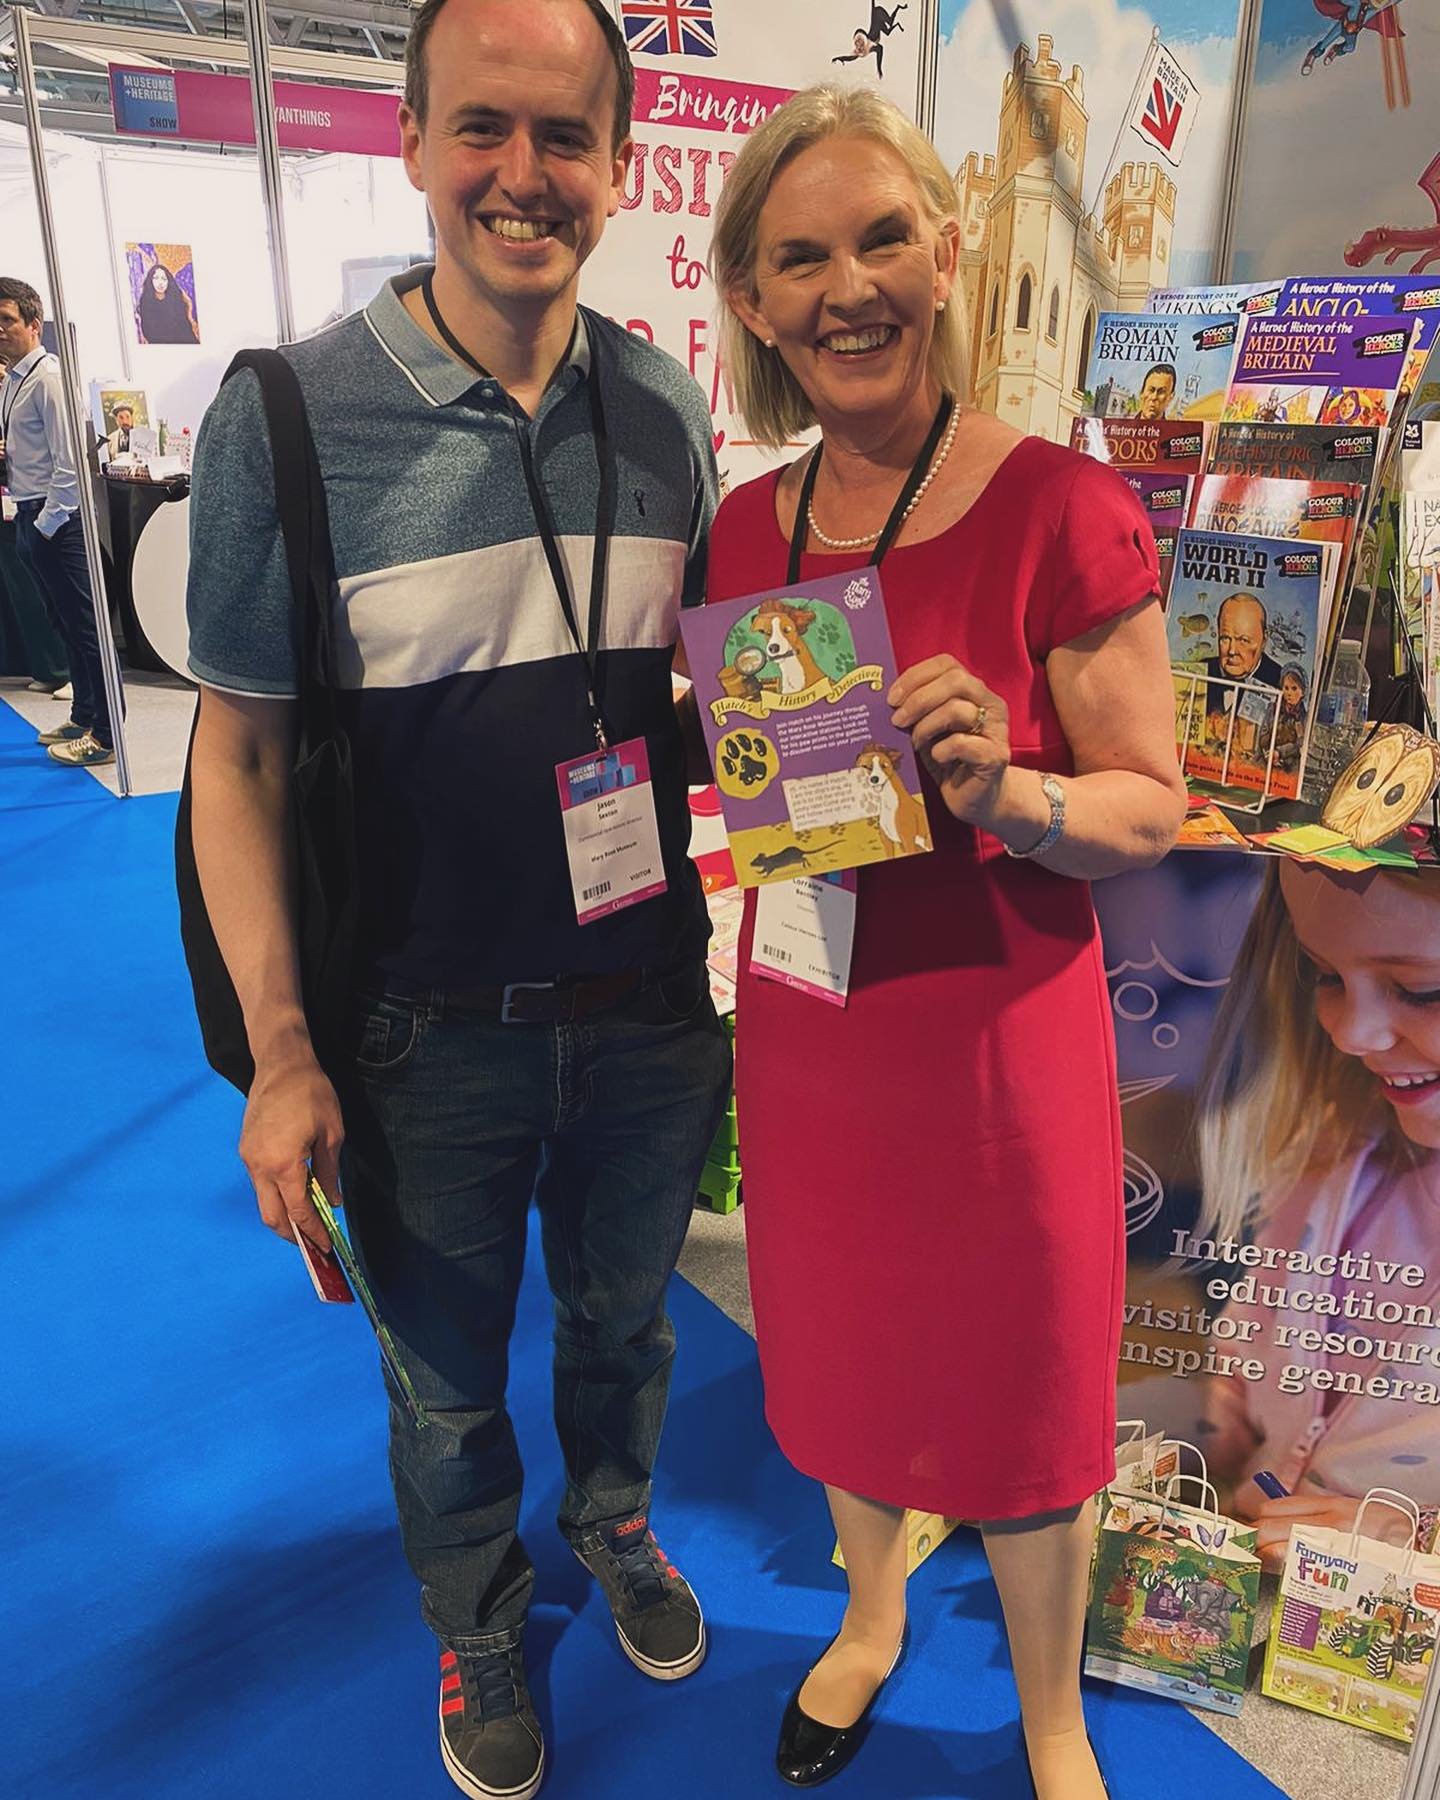 Today is the last day of the #MandHshow at Olympia London.

It&rsquo;s been great catching up and hearing how our bespoke children&rsquo;s resources are engaging your visitors 😊.

You&rsquo;ll find us on stand L8.